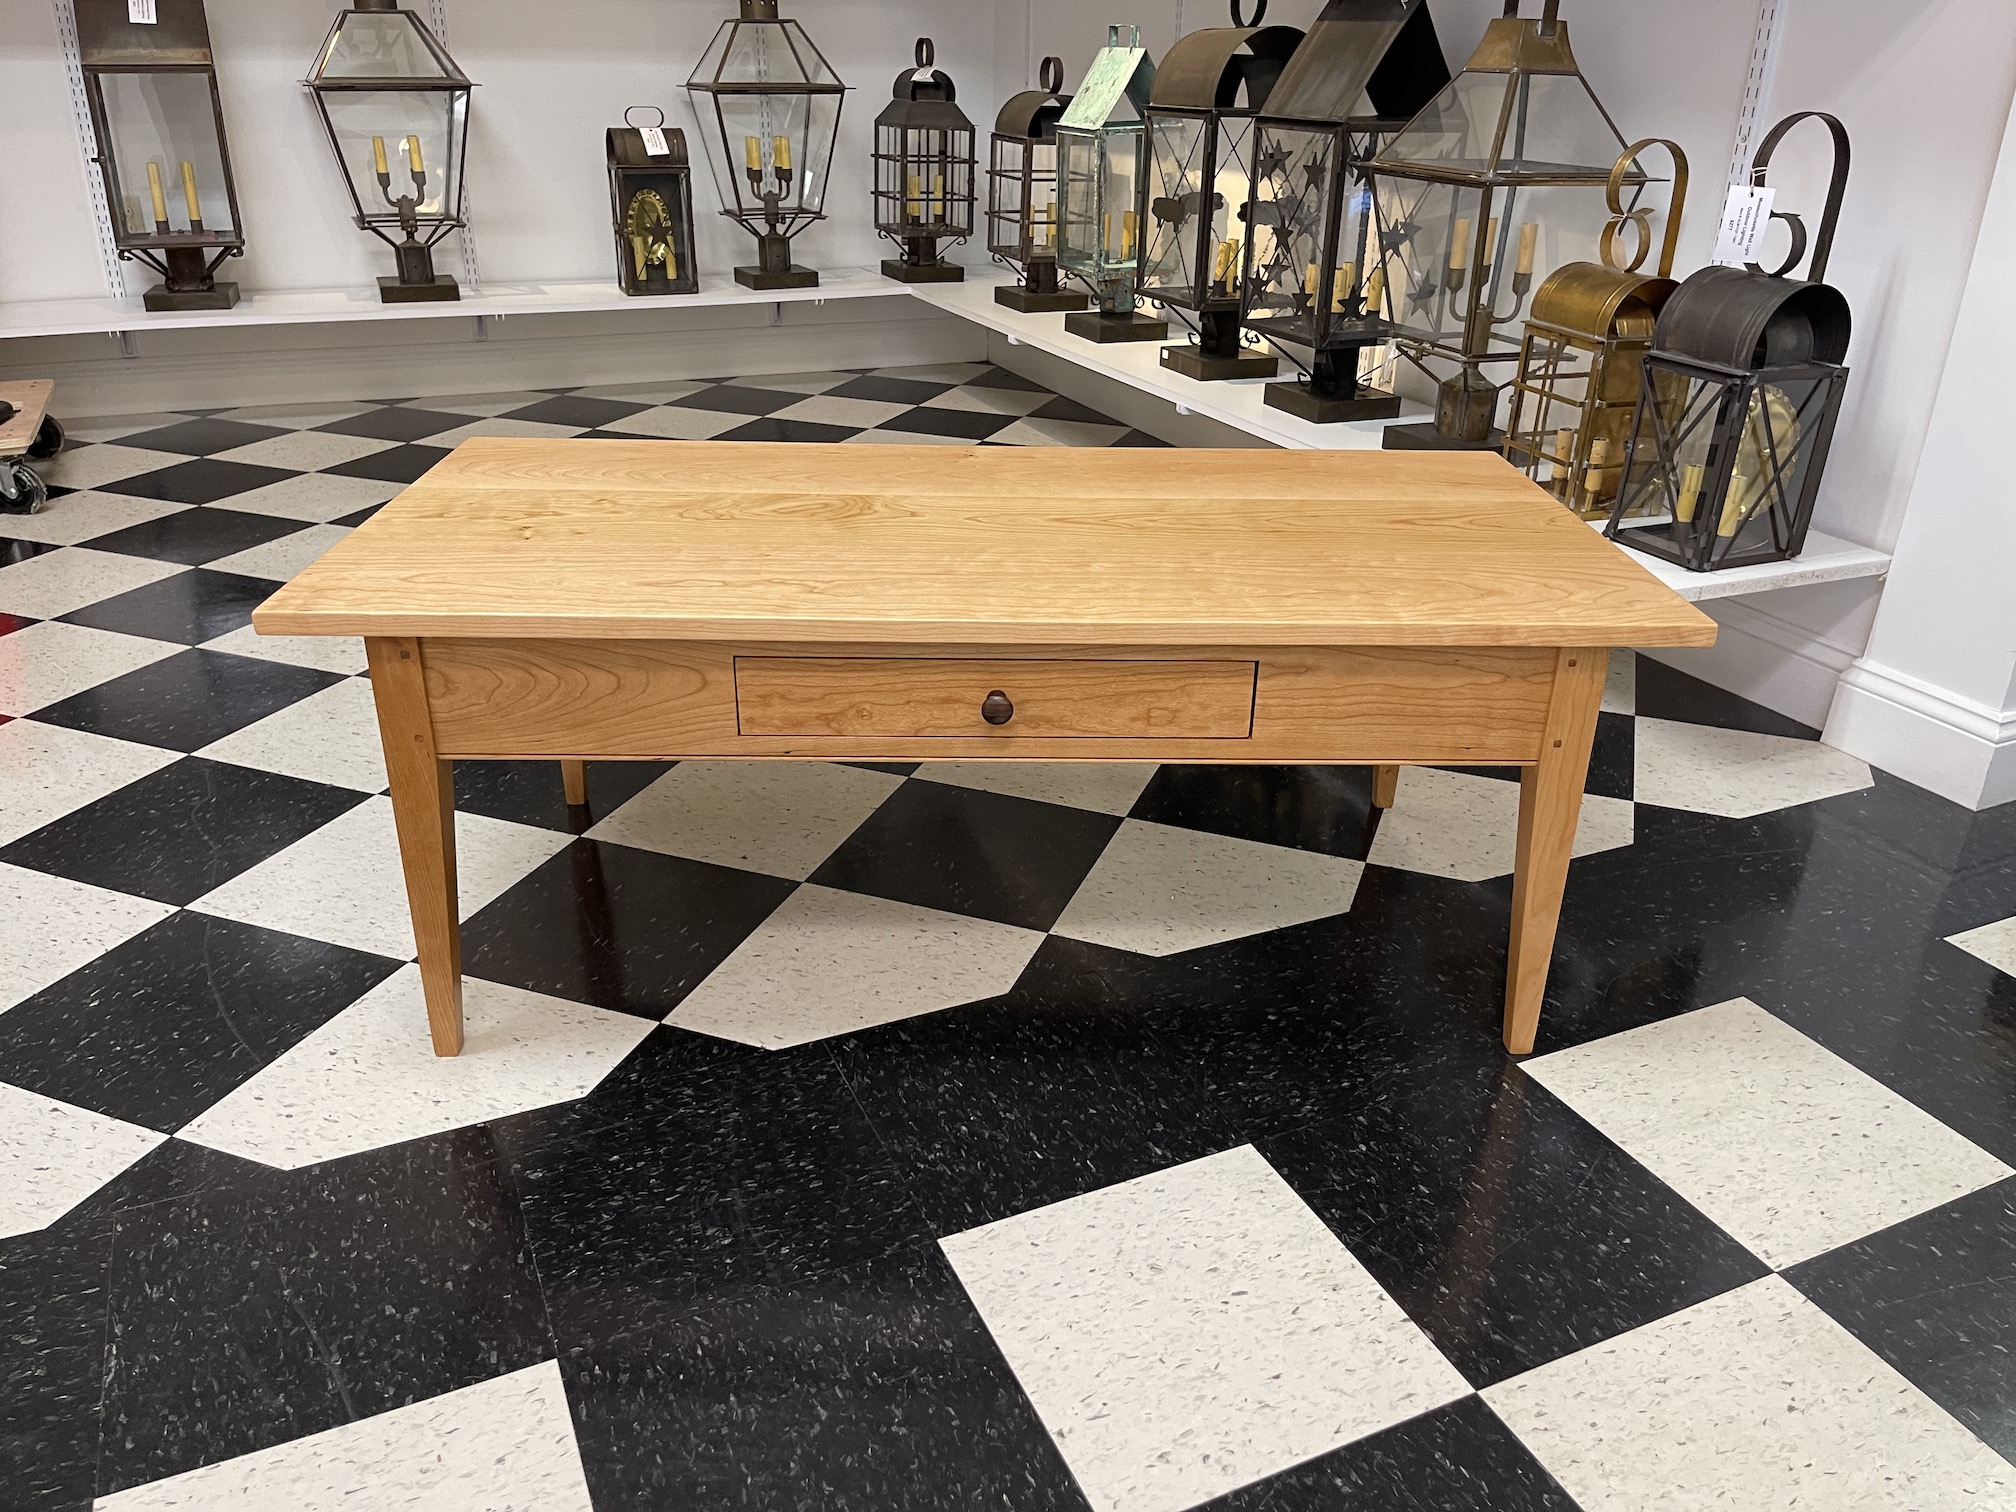 Shaker Style Coffee Table - Cherry Wood - Natural Finish Image